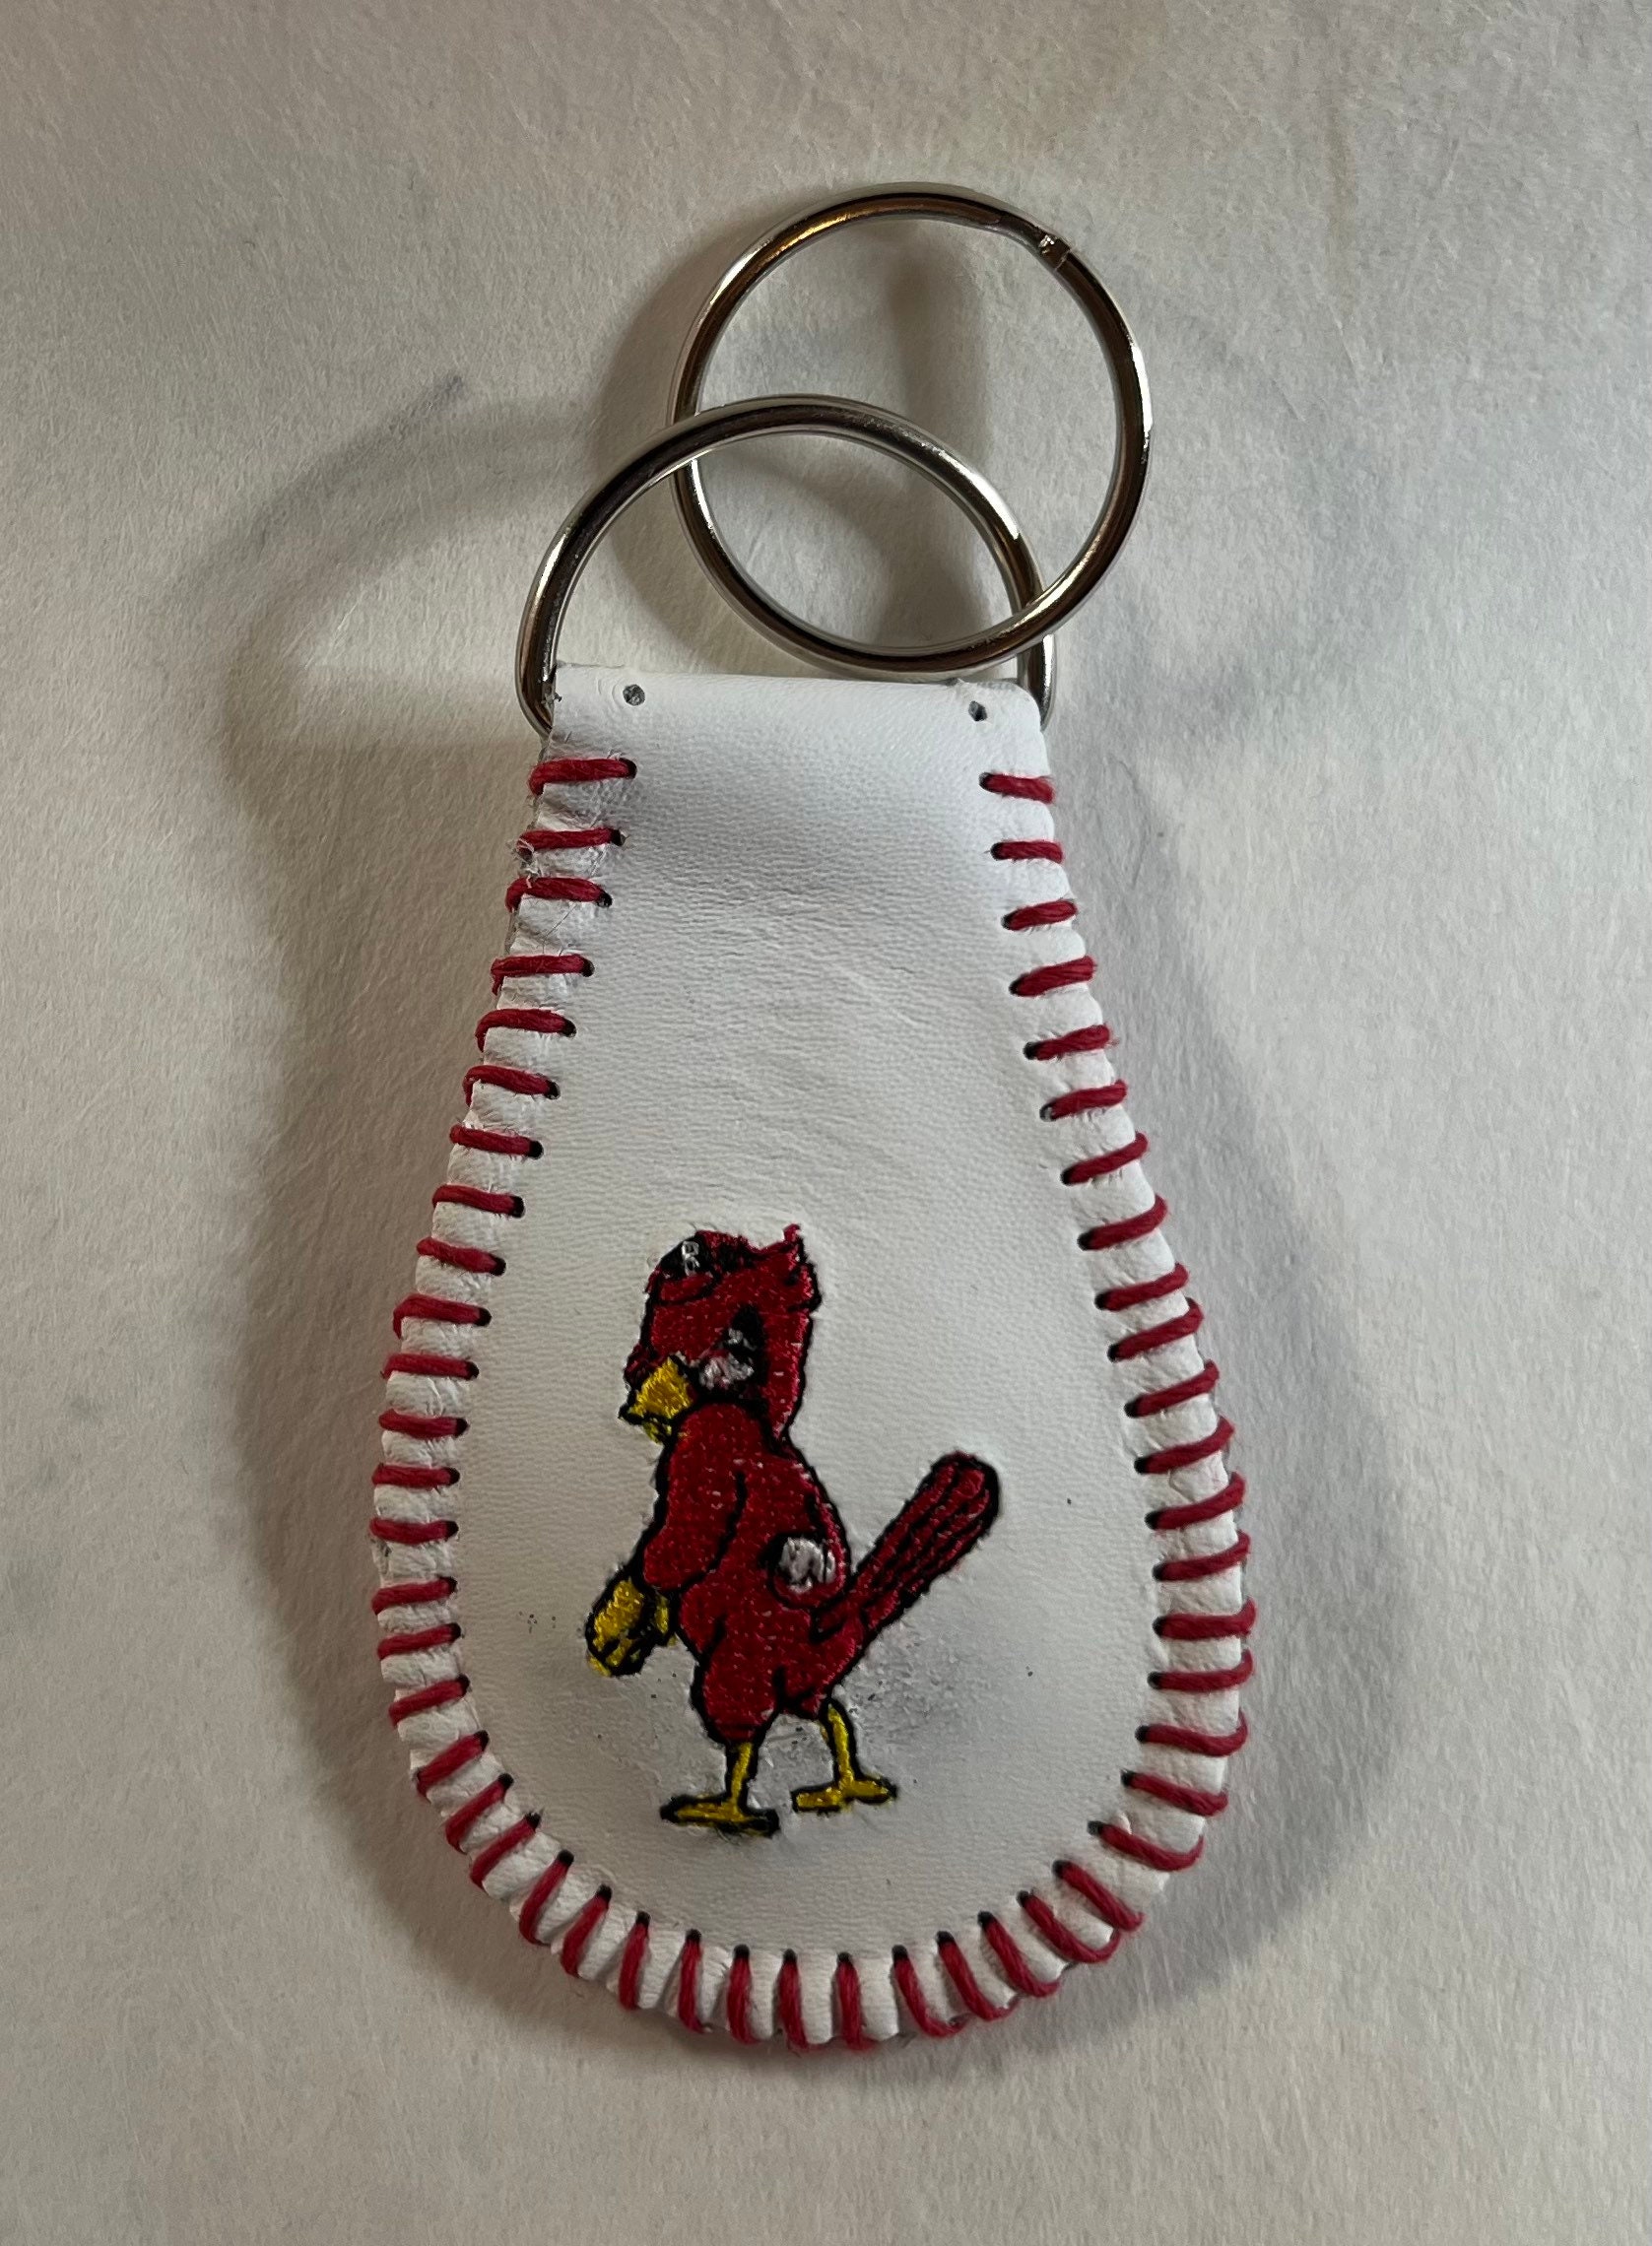 Buy St Louis Cardinals Baseball Leather Keychain Online in India